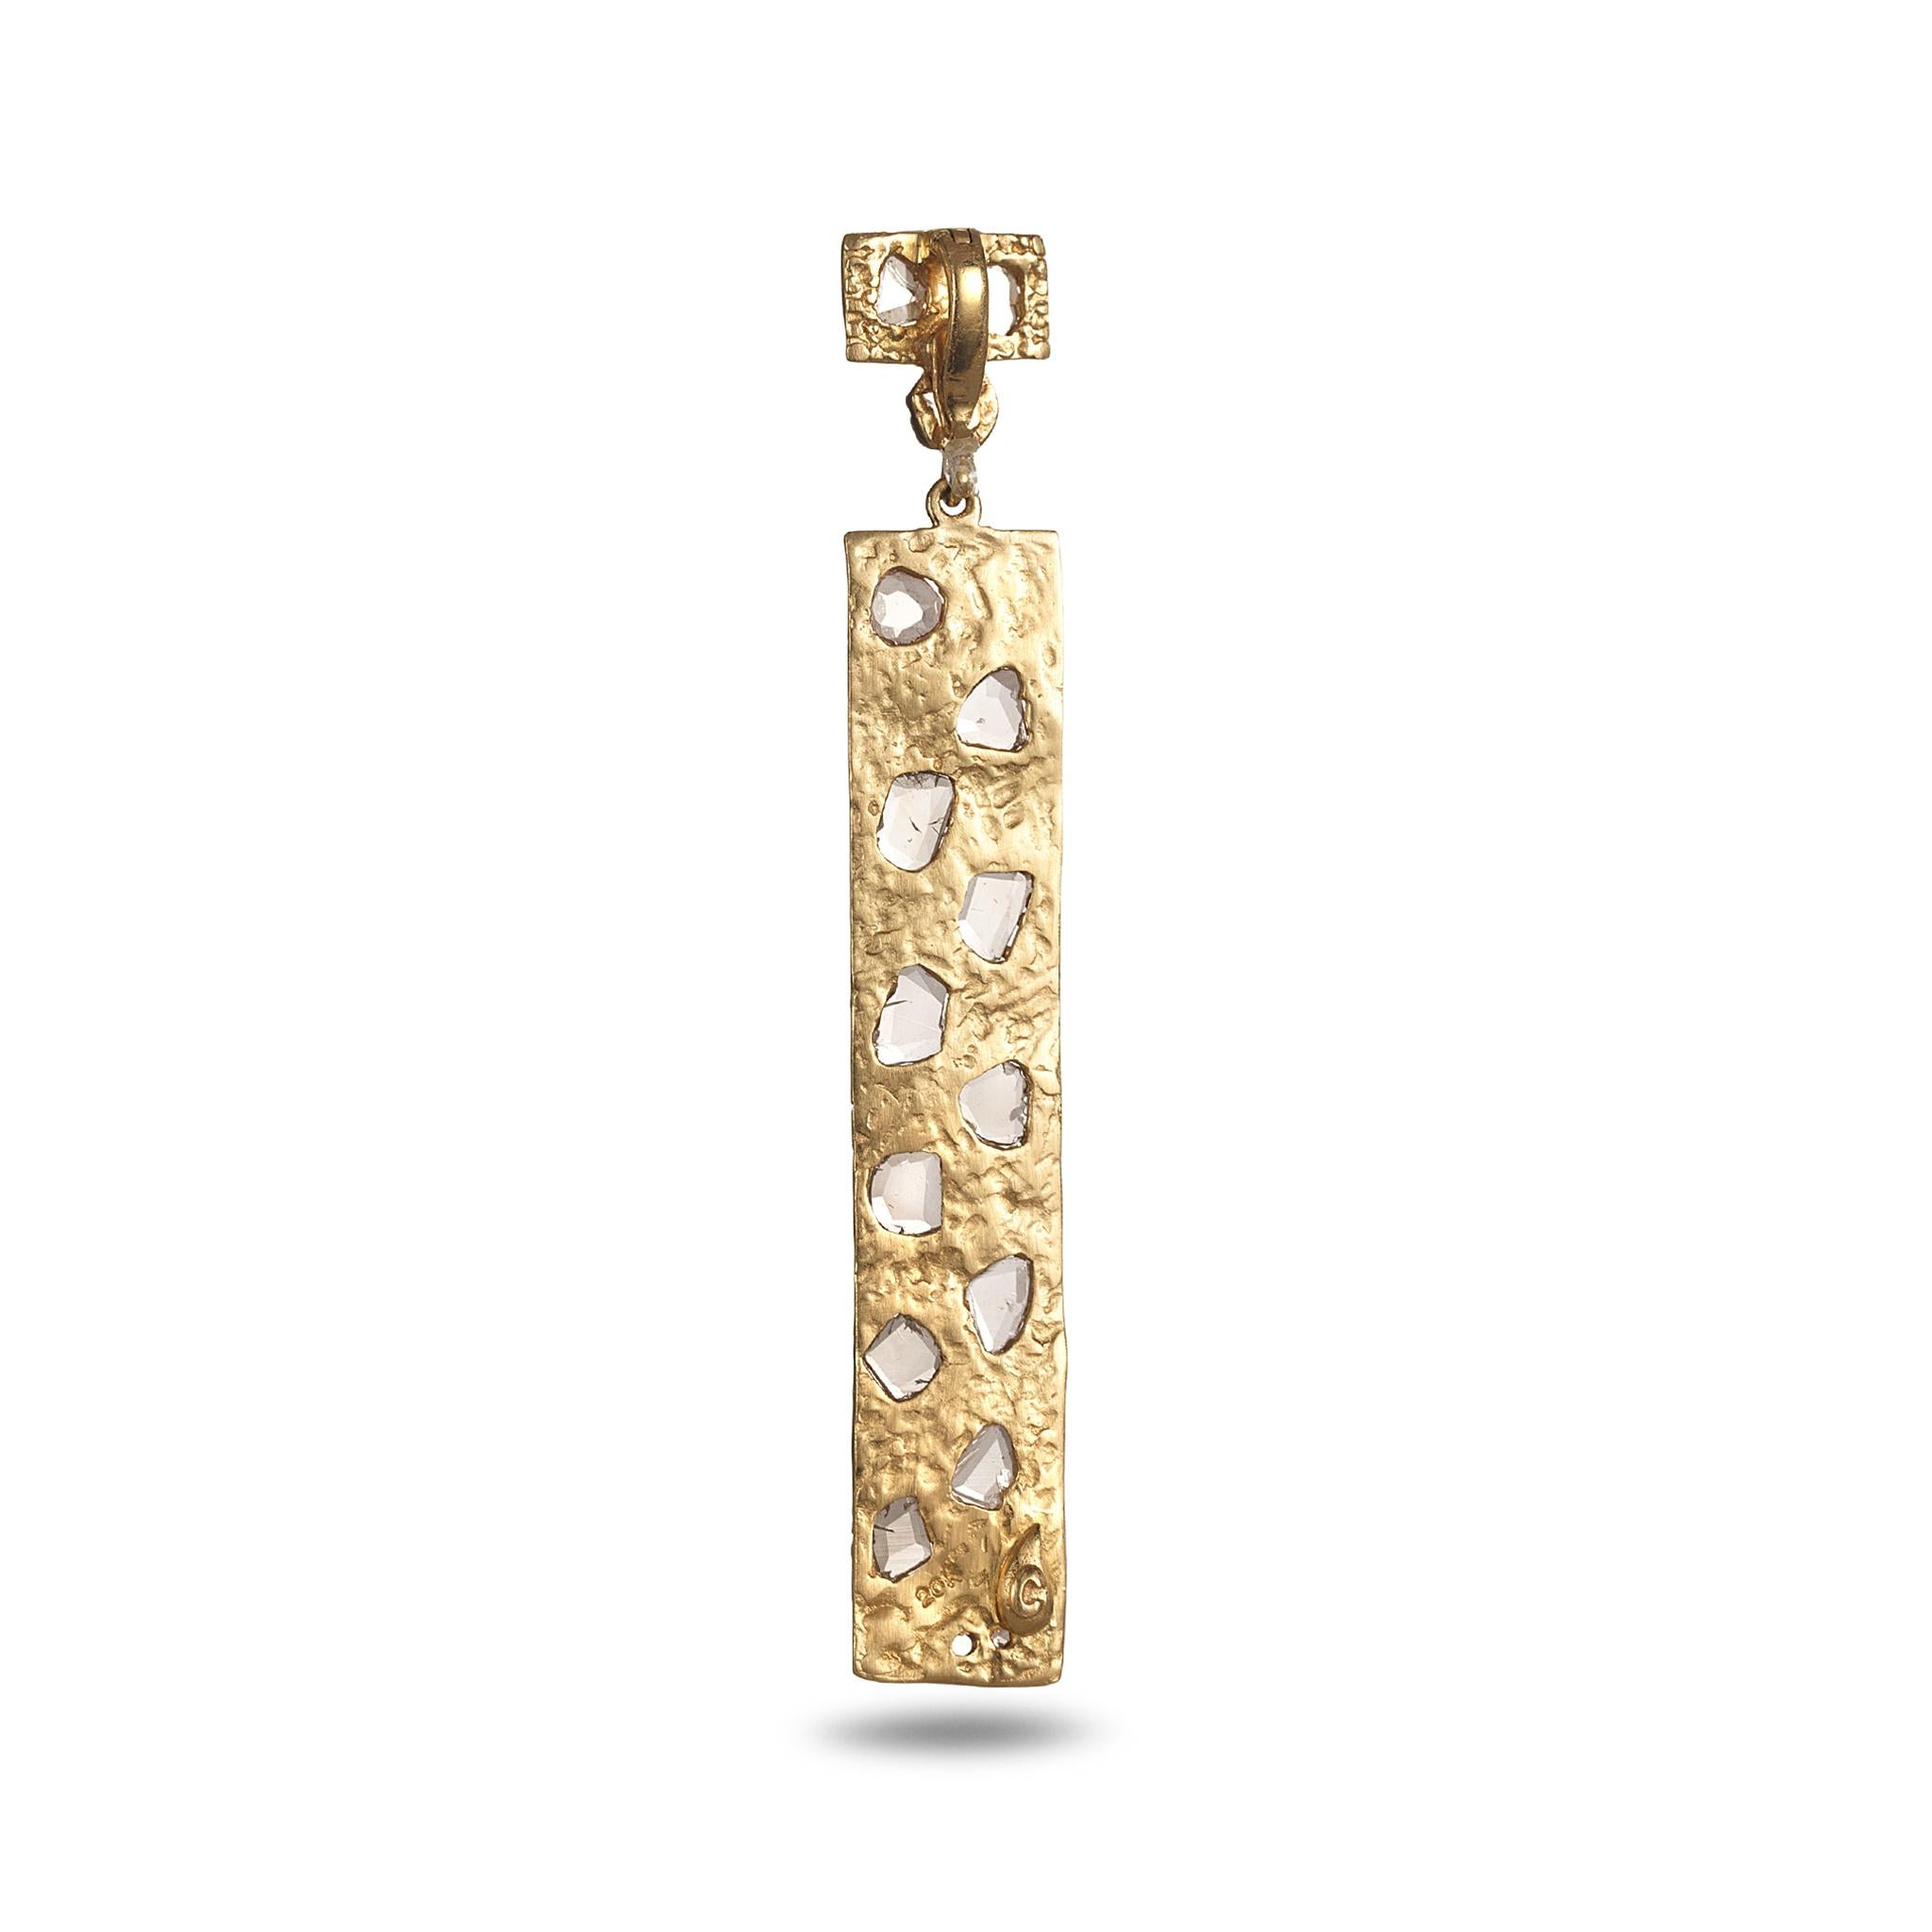 Coomi Luminosity pendant set in 20K yellow gold with 0.79cts diamonds.

Coomi’s Luminosity Collection consists of bold design and reflects light from within. Each uniquely natural rose cut diamond and diamond slice are chosen by Coomi for the pieces